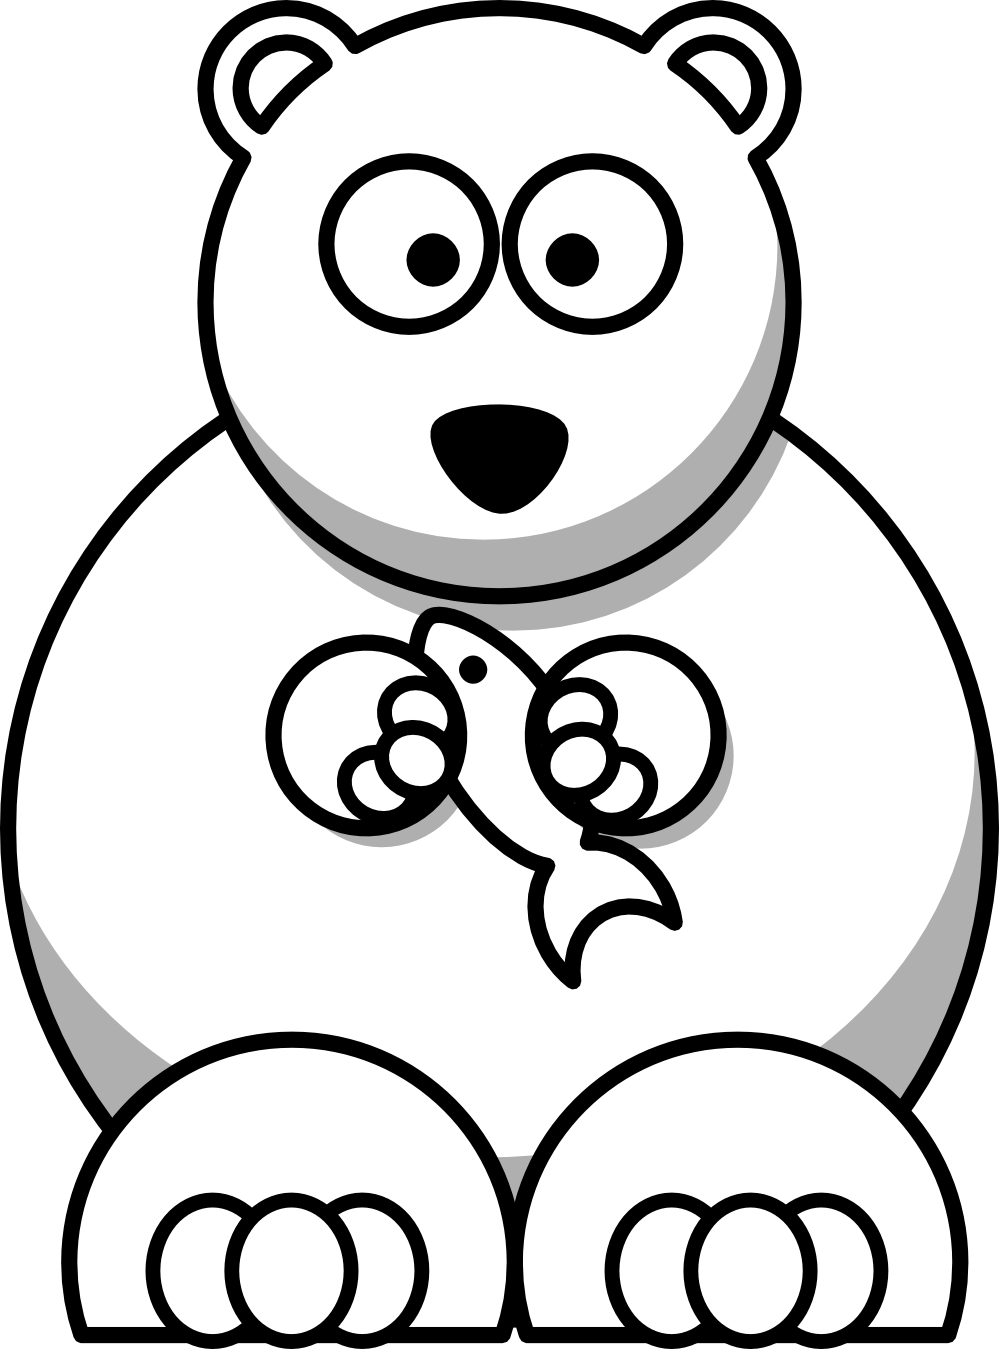 Clipart bear black and white